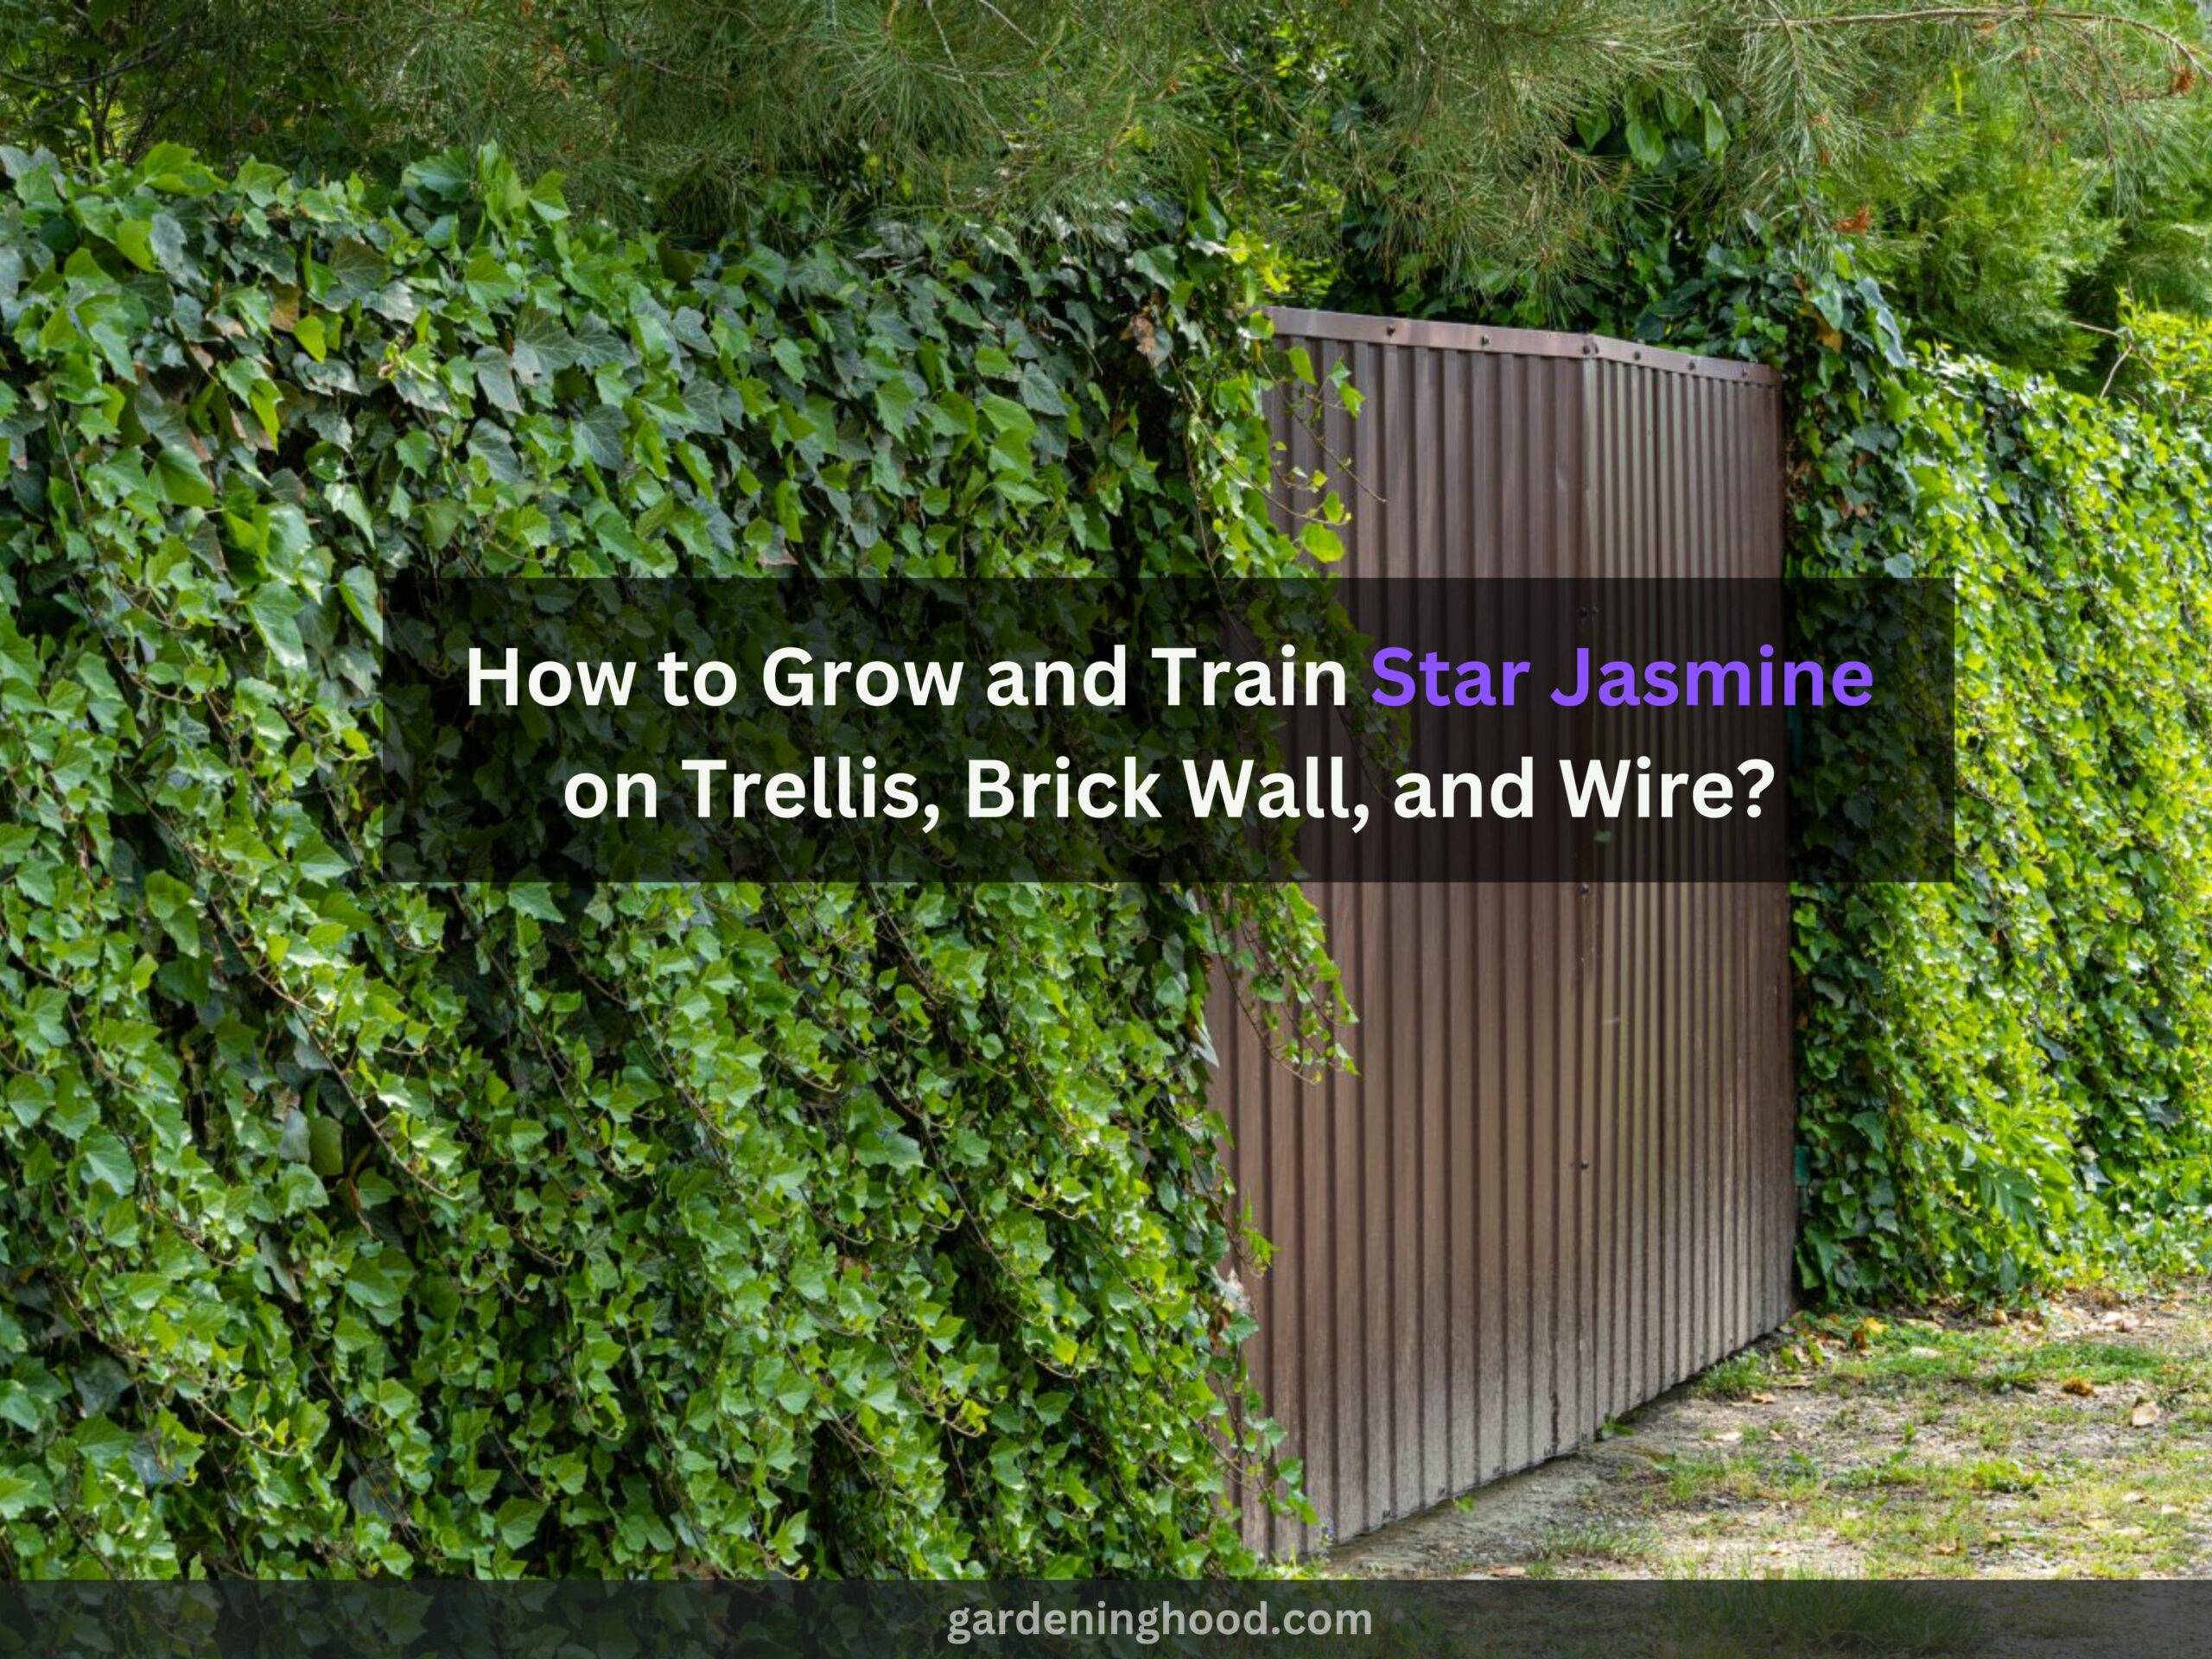 How to Grow and Train Star Jasmine on Trellis, Brick Wall, and Wire?